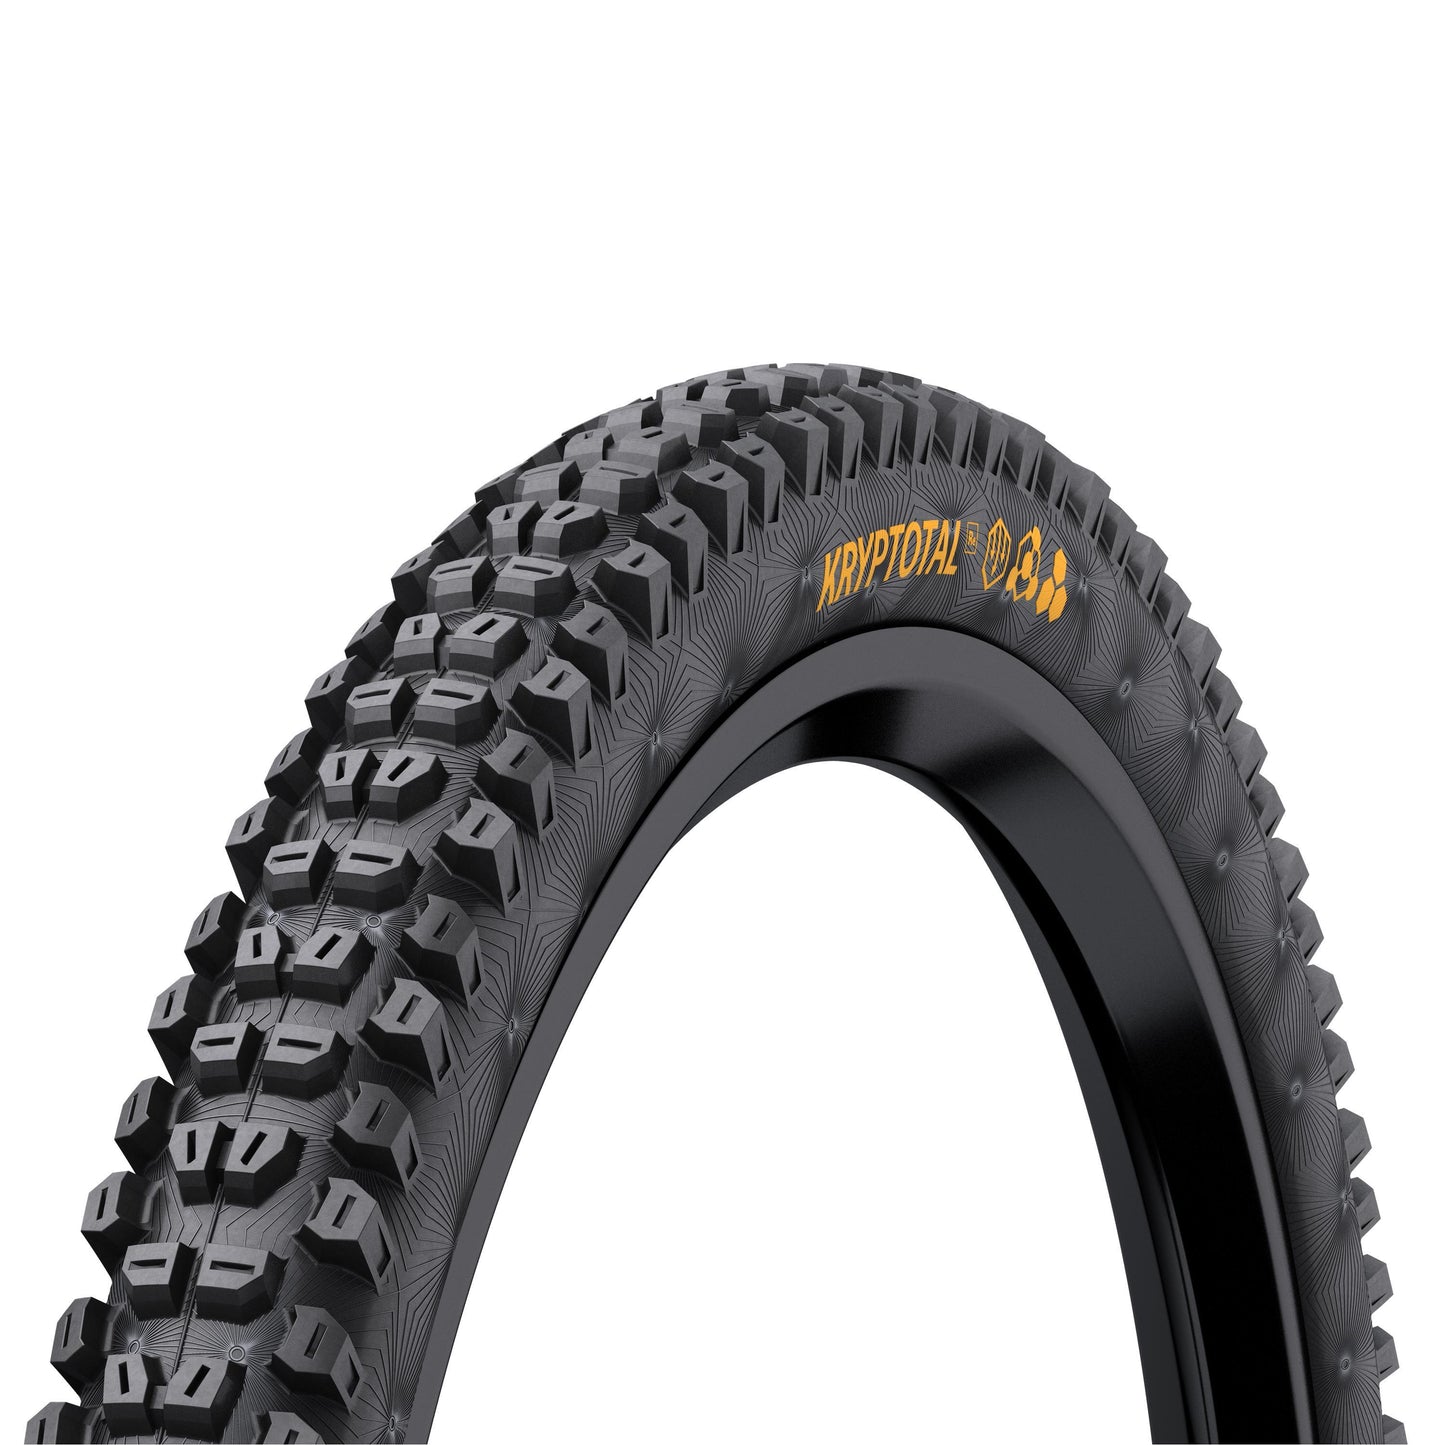 CONTINENTAL KRYPTOTAL REAR ENDURO TYRE - SOFT COMPOUND FOLDABLE